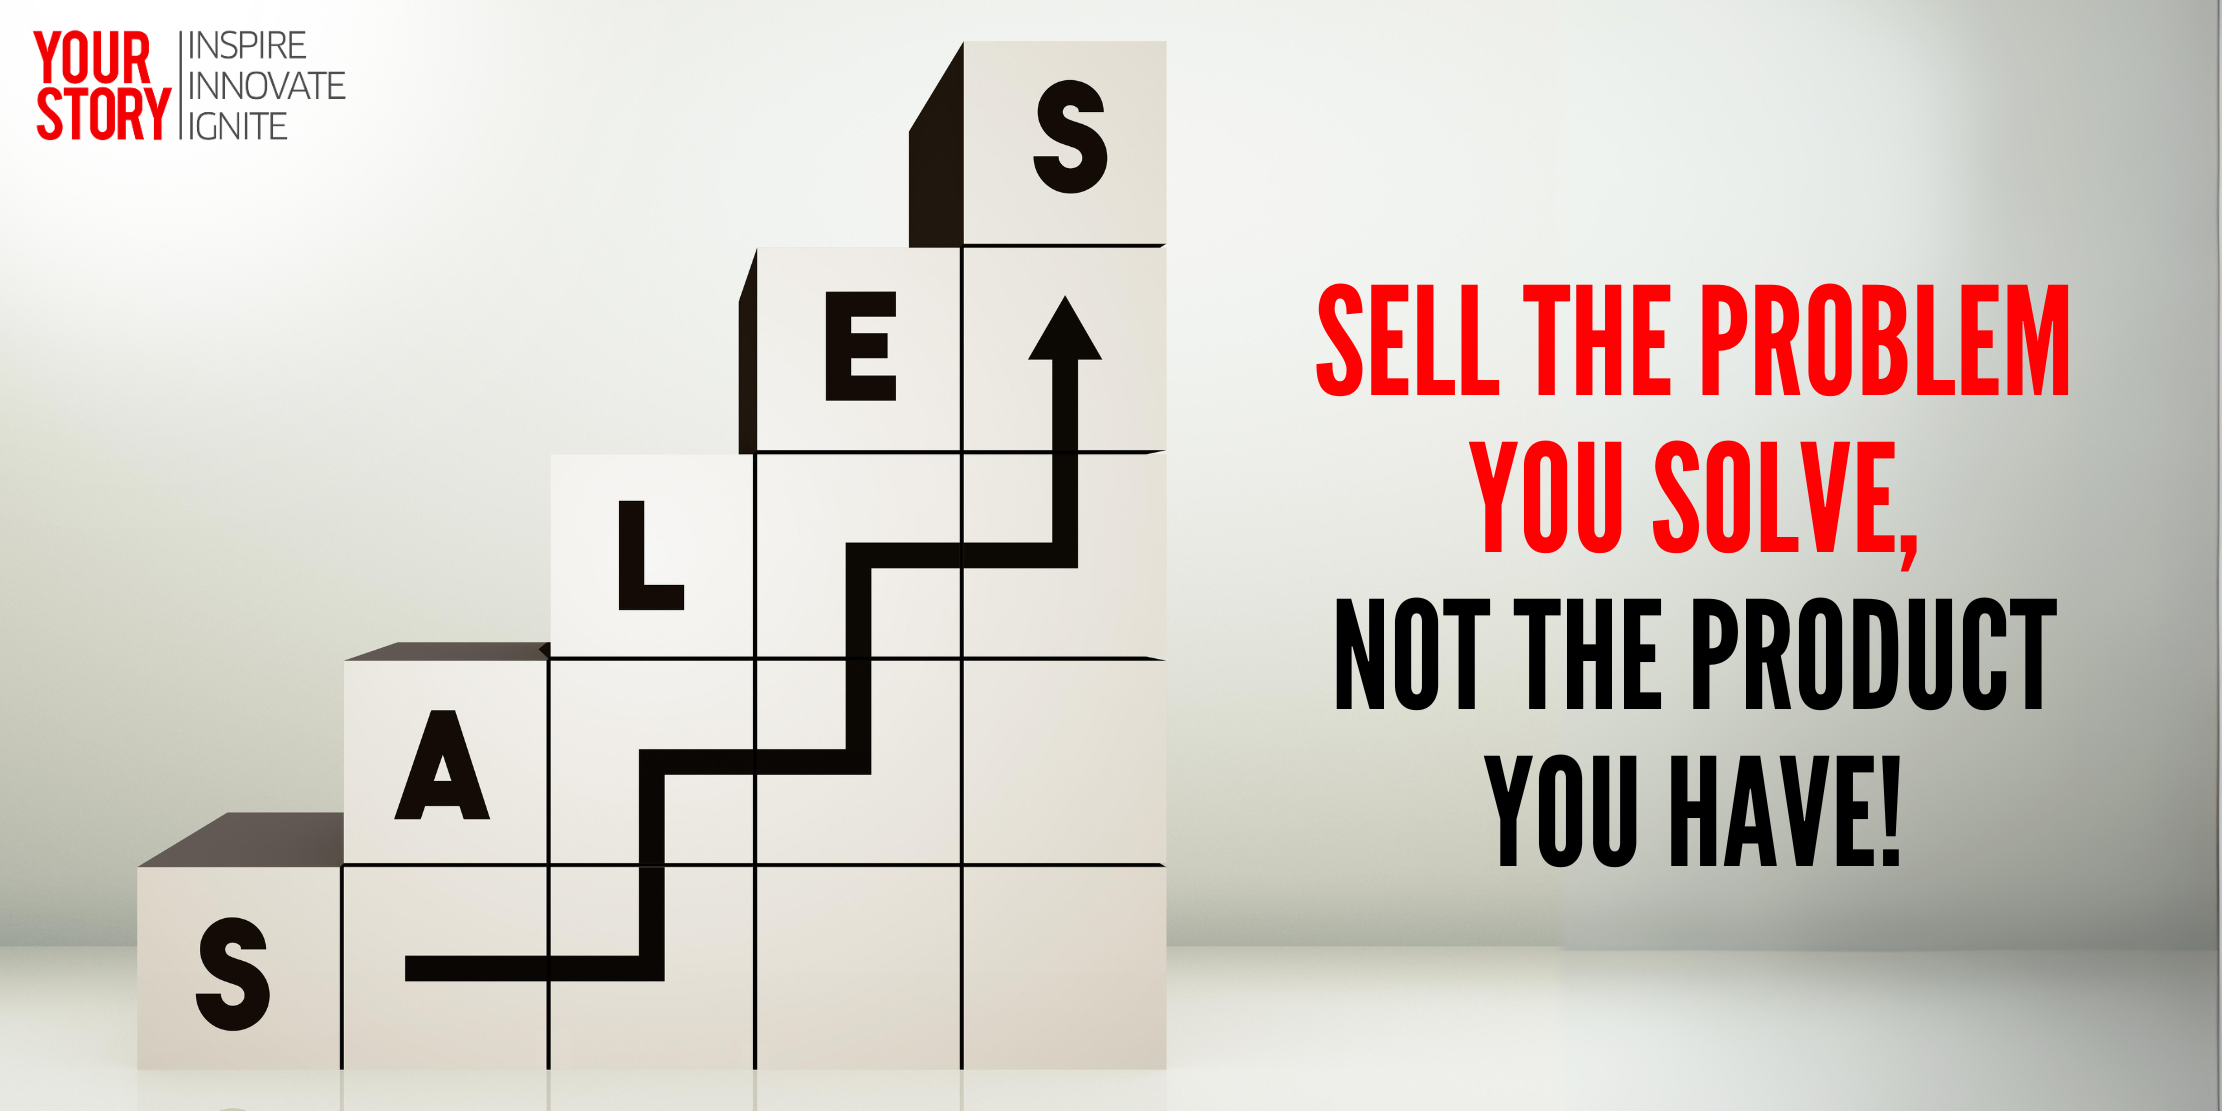 ⁠Sell the problem you solve, not the product you have!